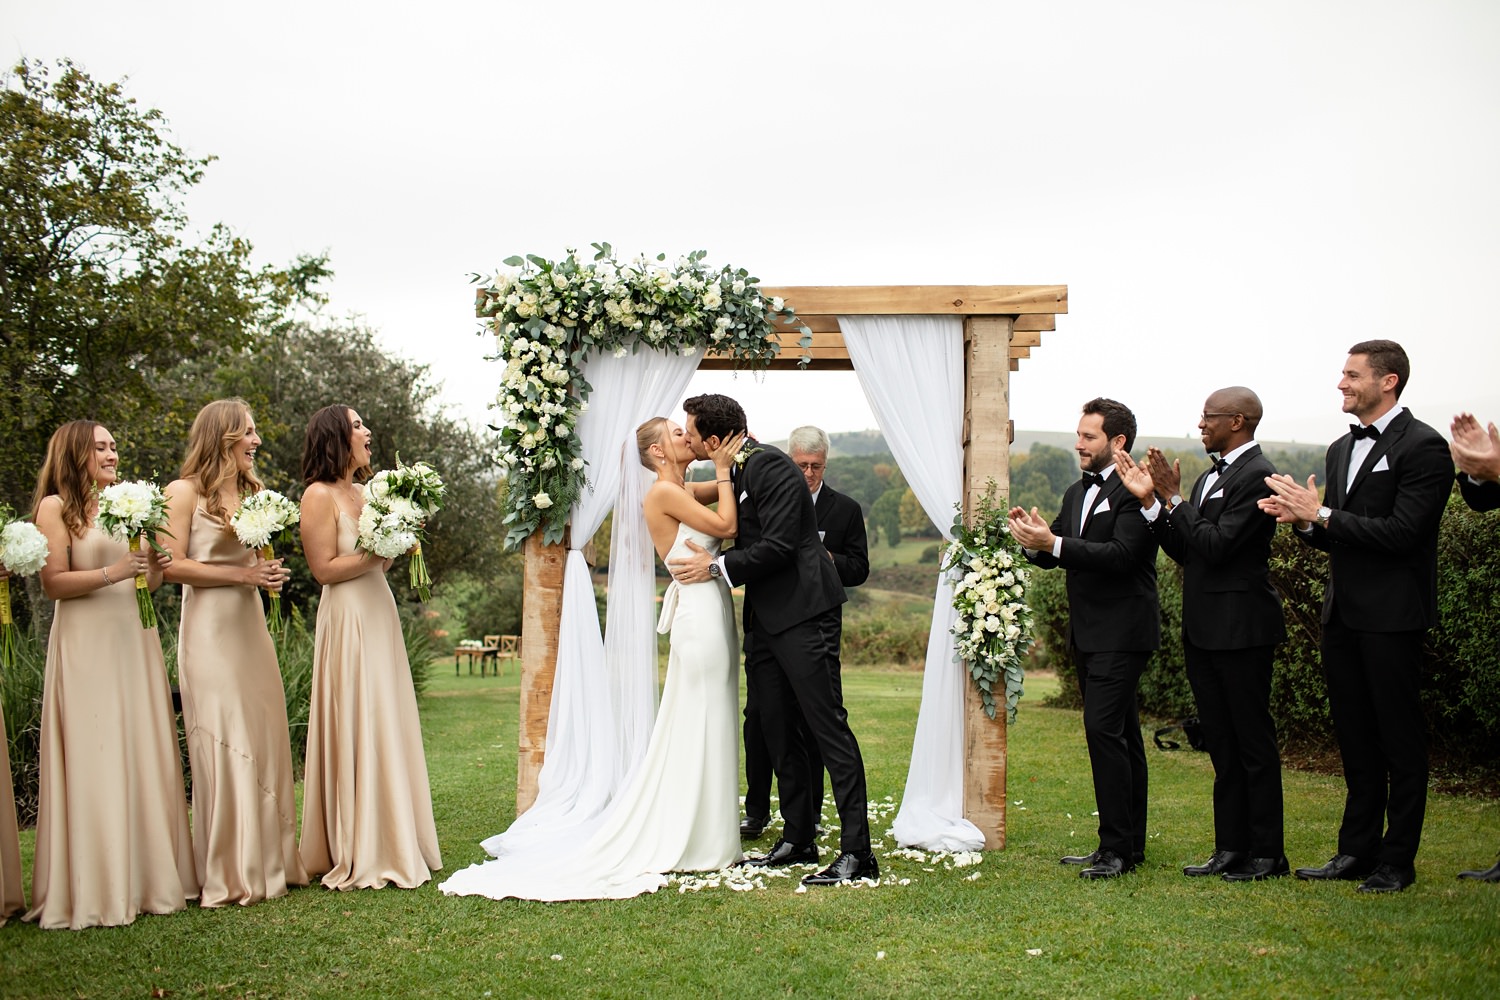 The bride and groom kiss at their Central Drakensberg wedding